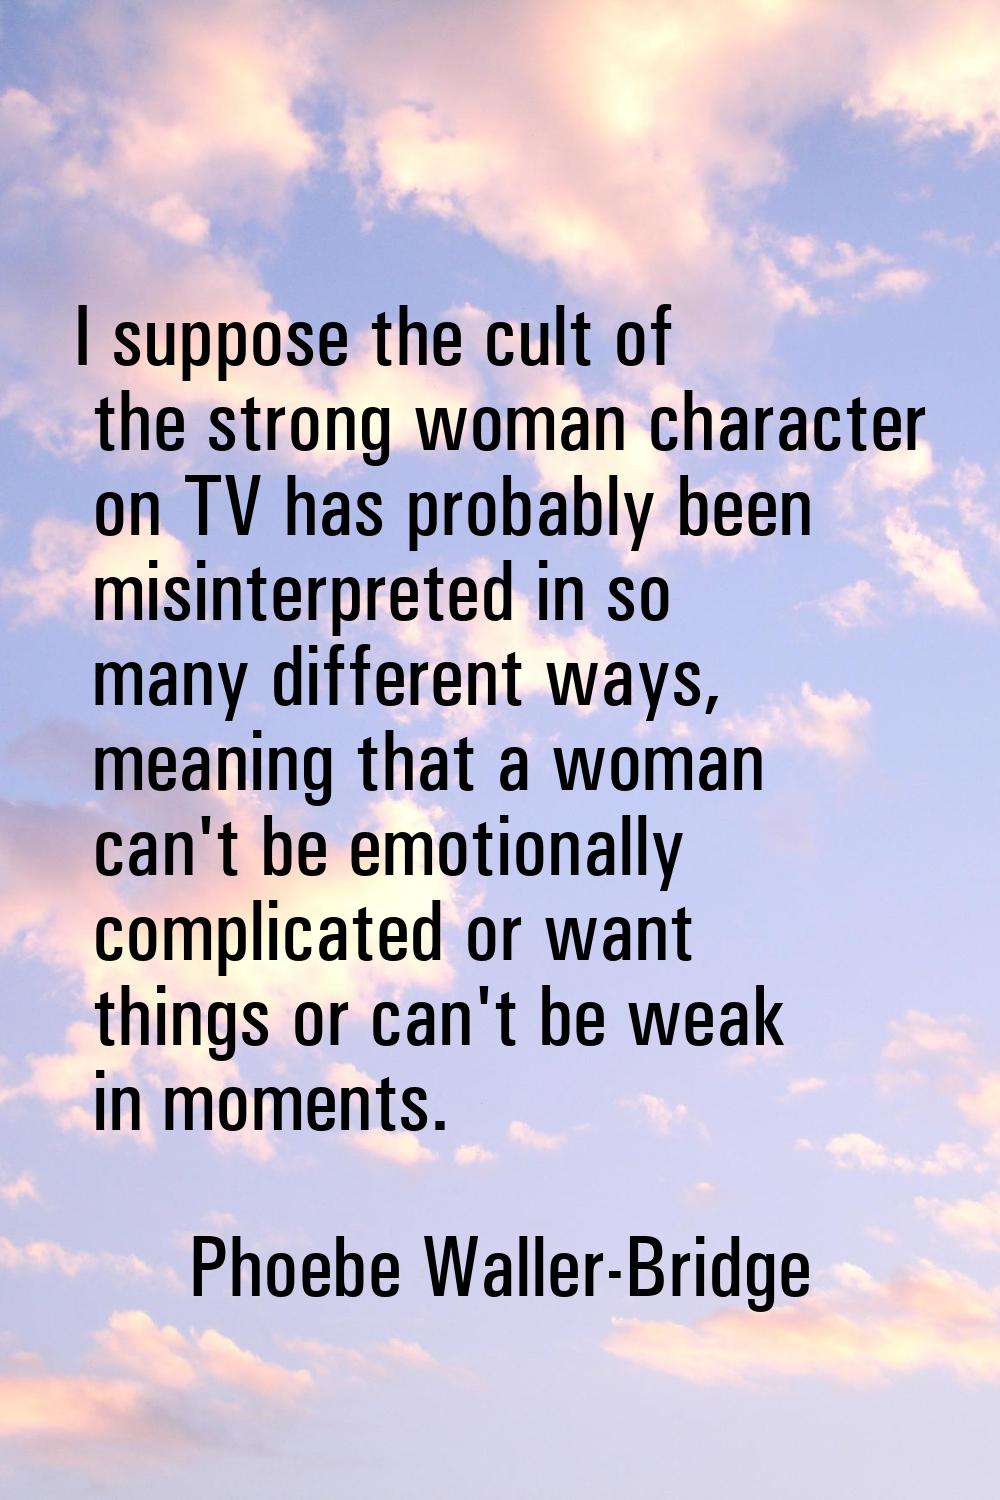 I suppose the cult of the strong woman character on TV has probably been misinterpreted in so many 